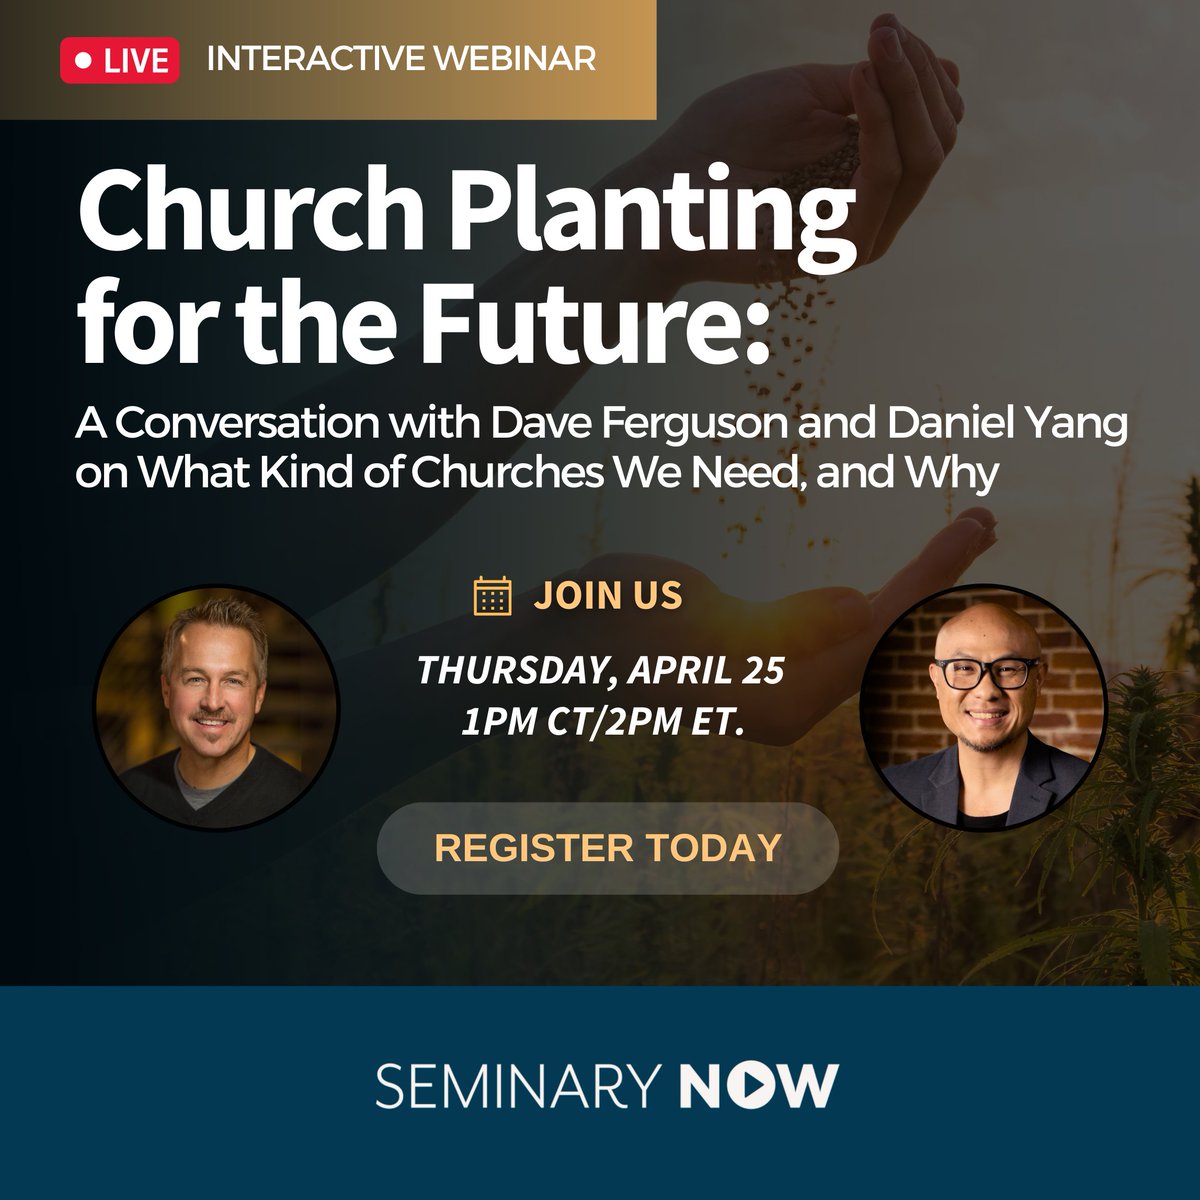 Feeling called to plant a church? 🌱 Join our webinar on April 25th and discover the steps to turn your vision into a thriving community of faith. Register now: seminarynow.com/pages/church-p… #freewebinar #churchplanting #community